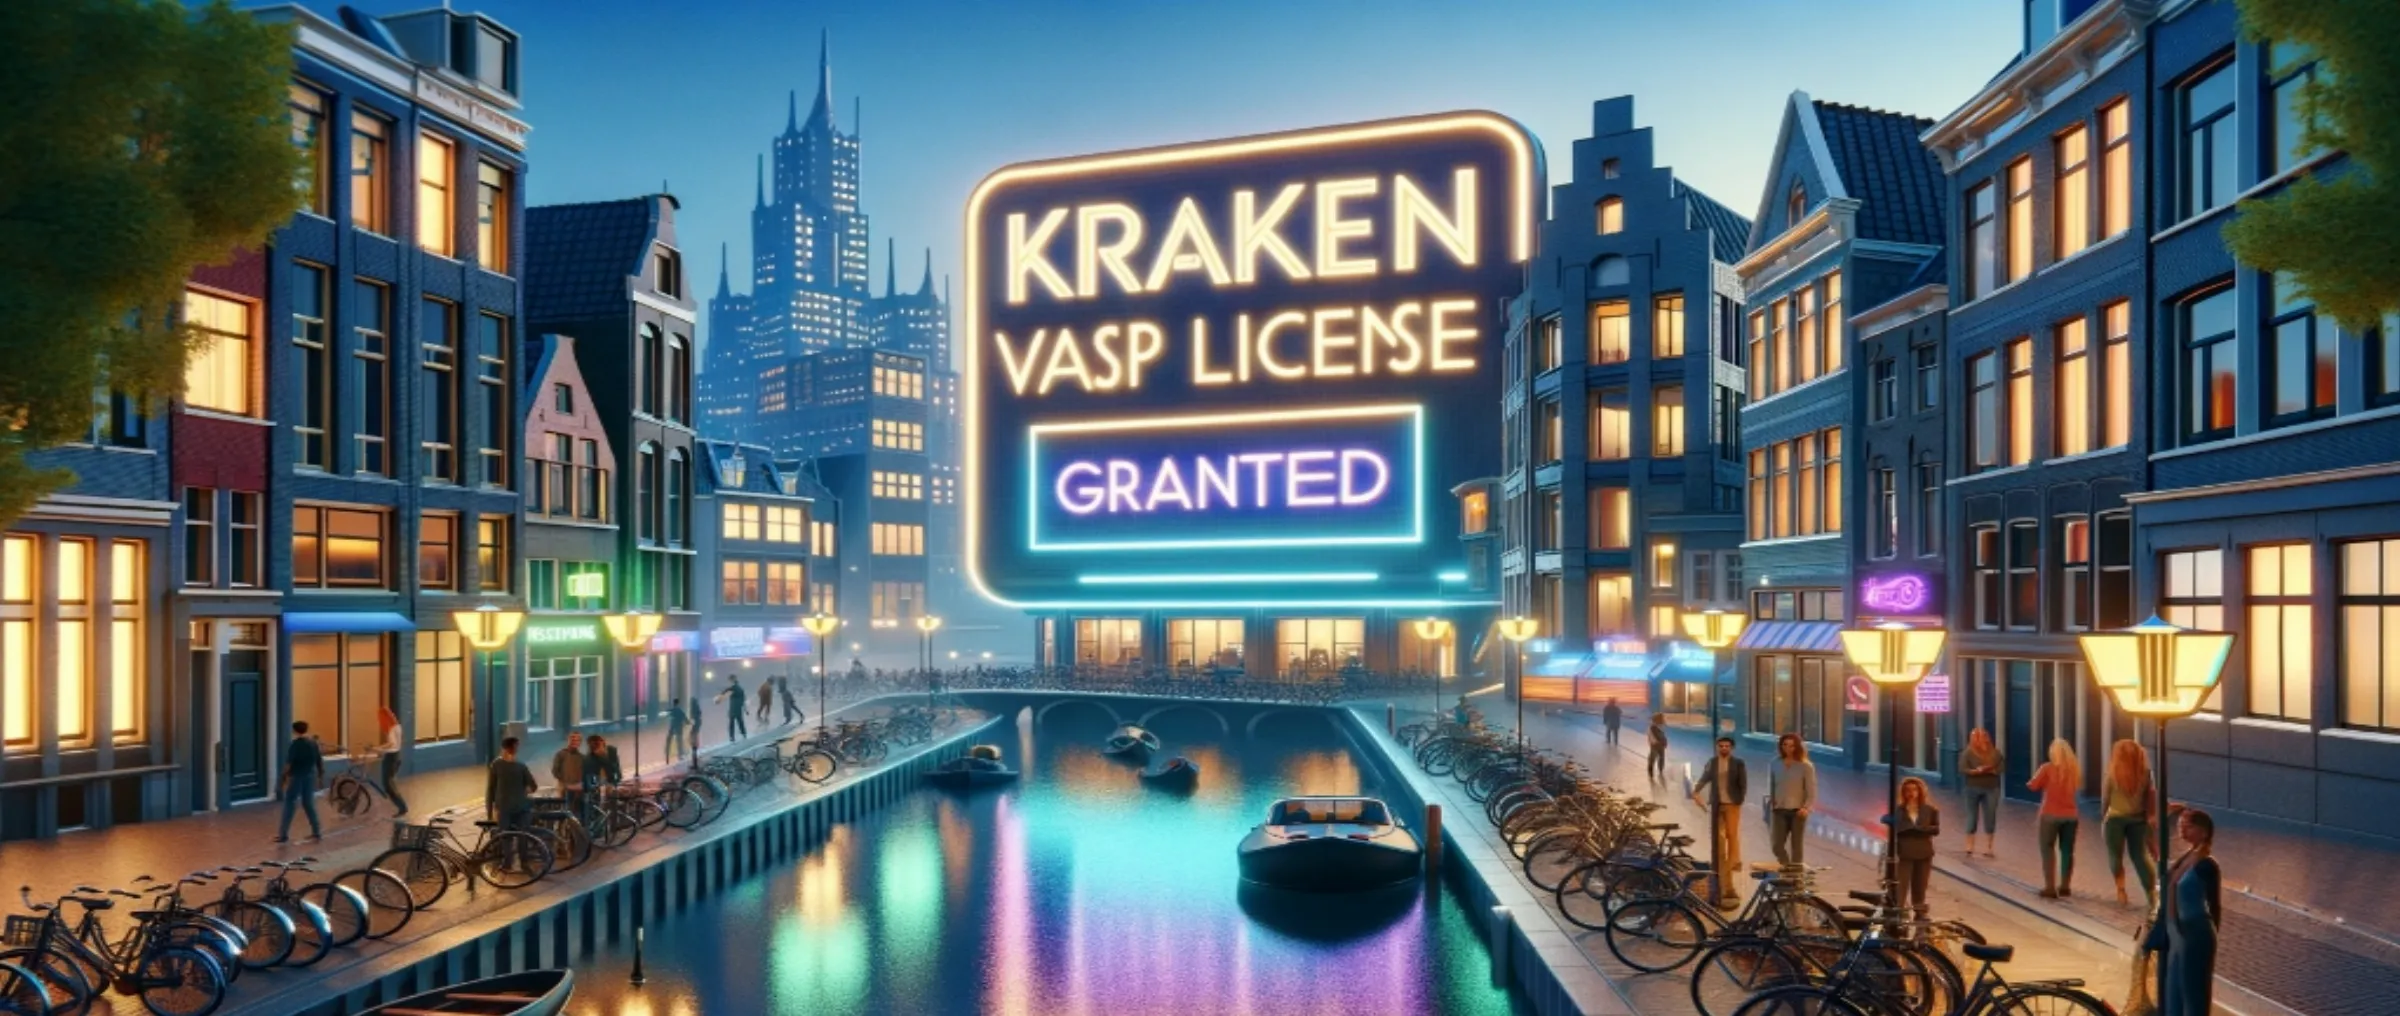 Kraken has received permission to operate VASP in the Netherlands